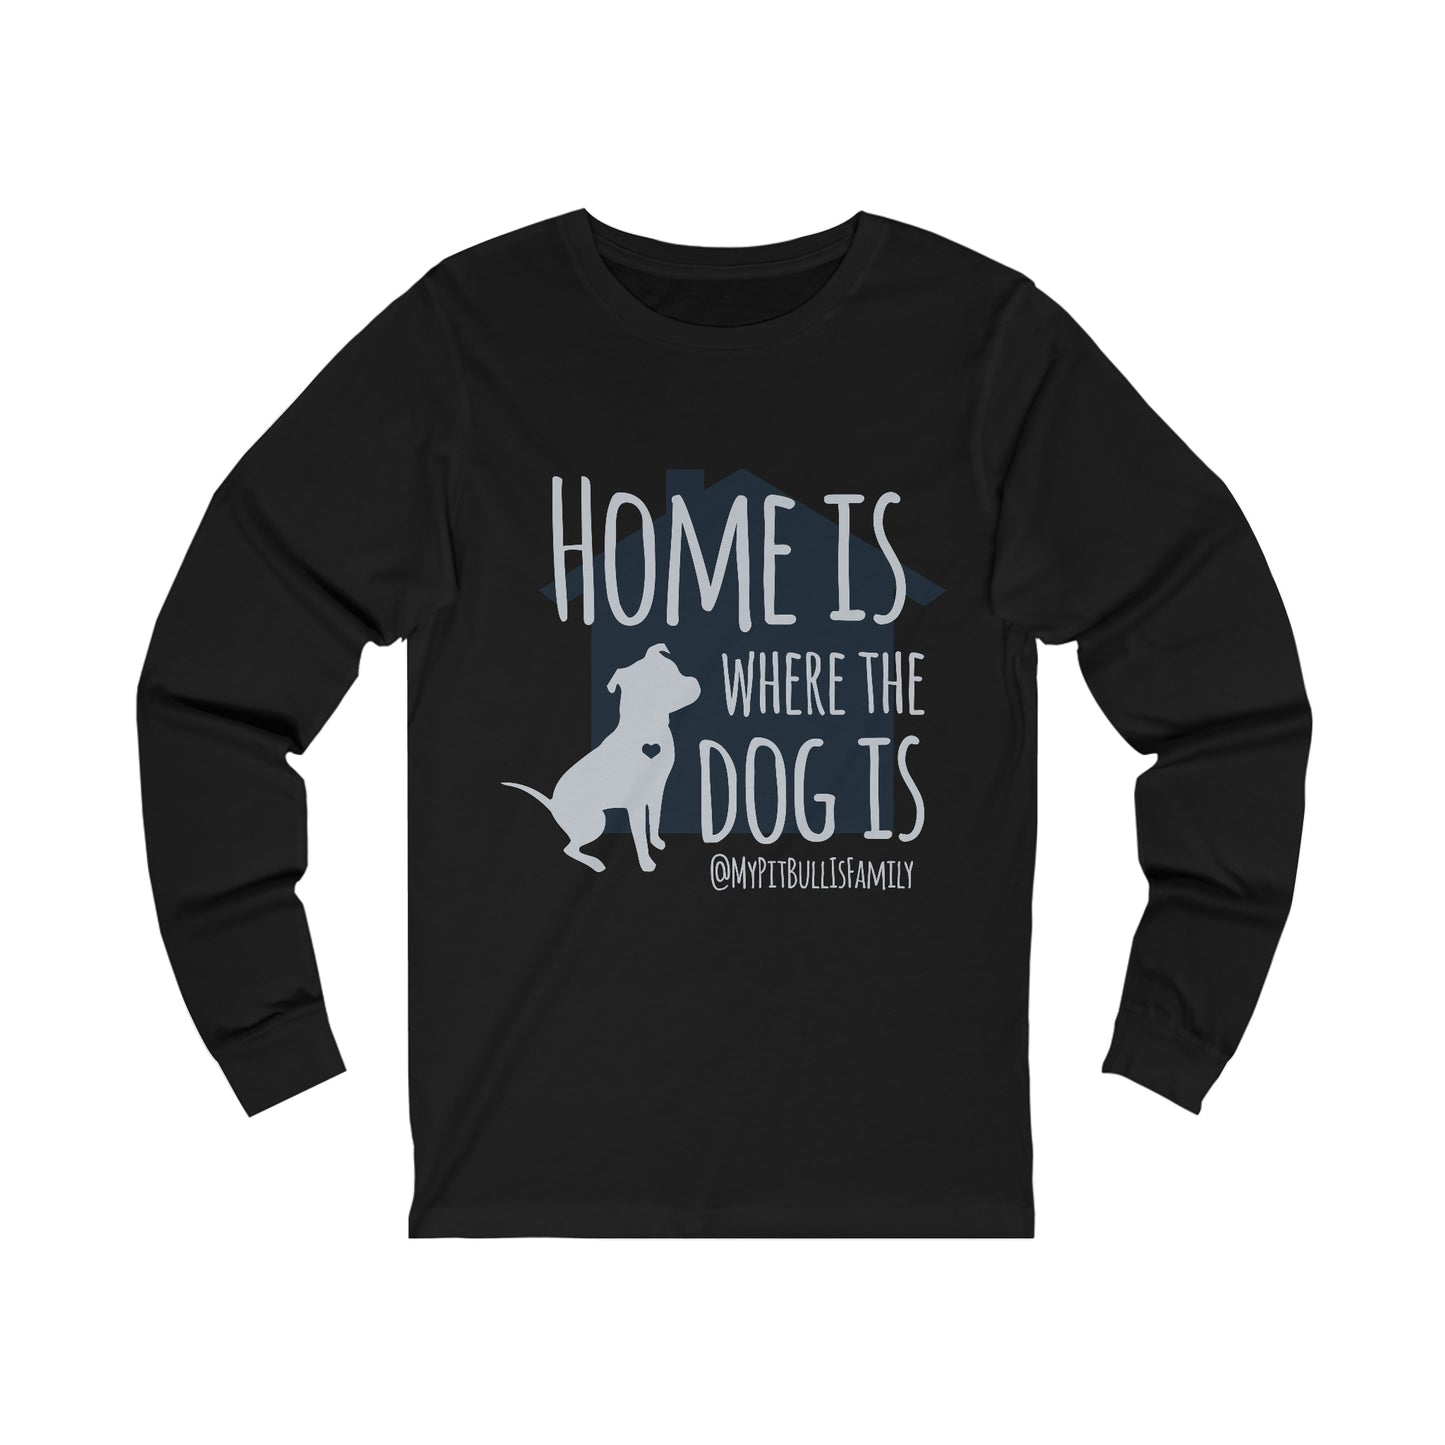 Home is Where the Dog is Unisex Jersey Long Sleeve Tee